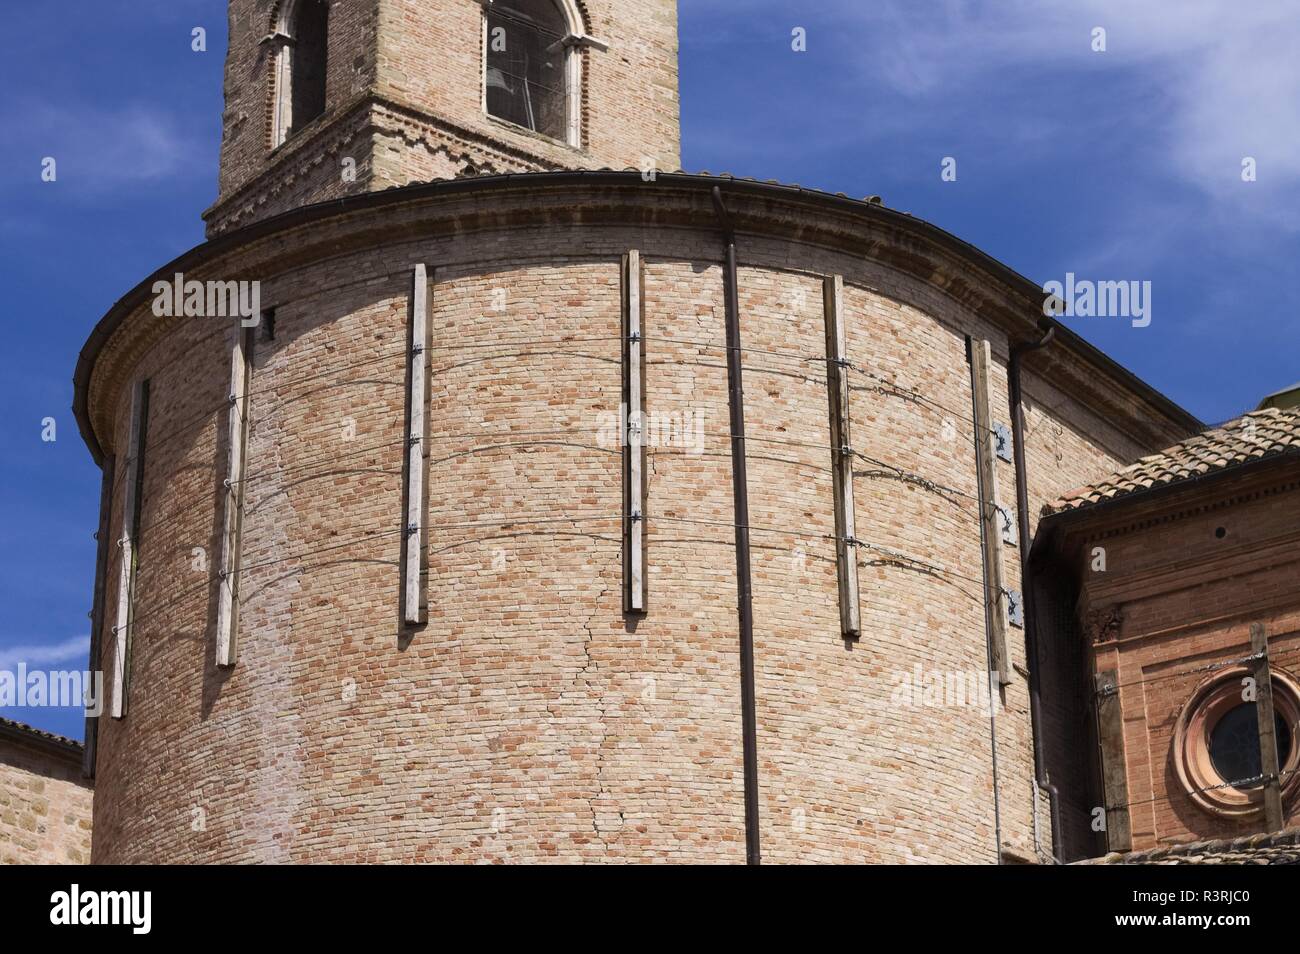 Medieval abbey reinforced with steel elements after the earthquake (Tolentino, Marche, Italy) Stock Photo